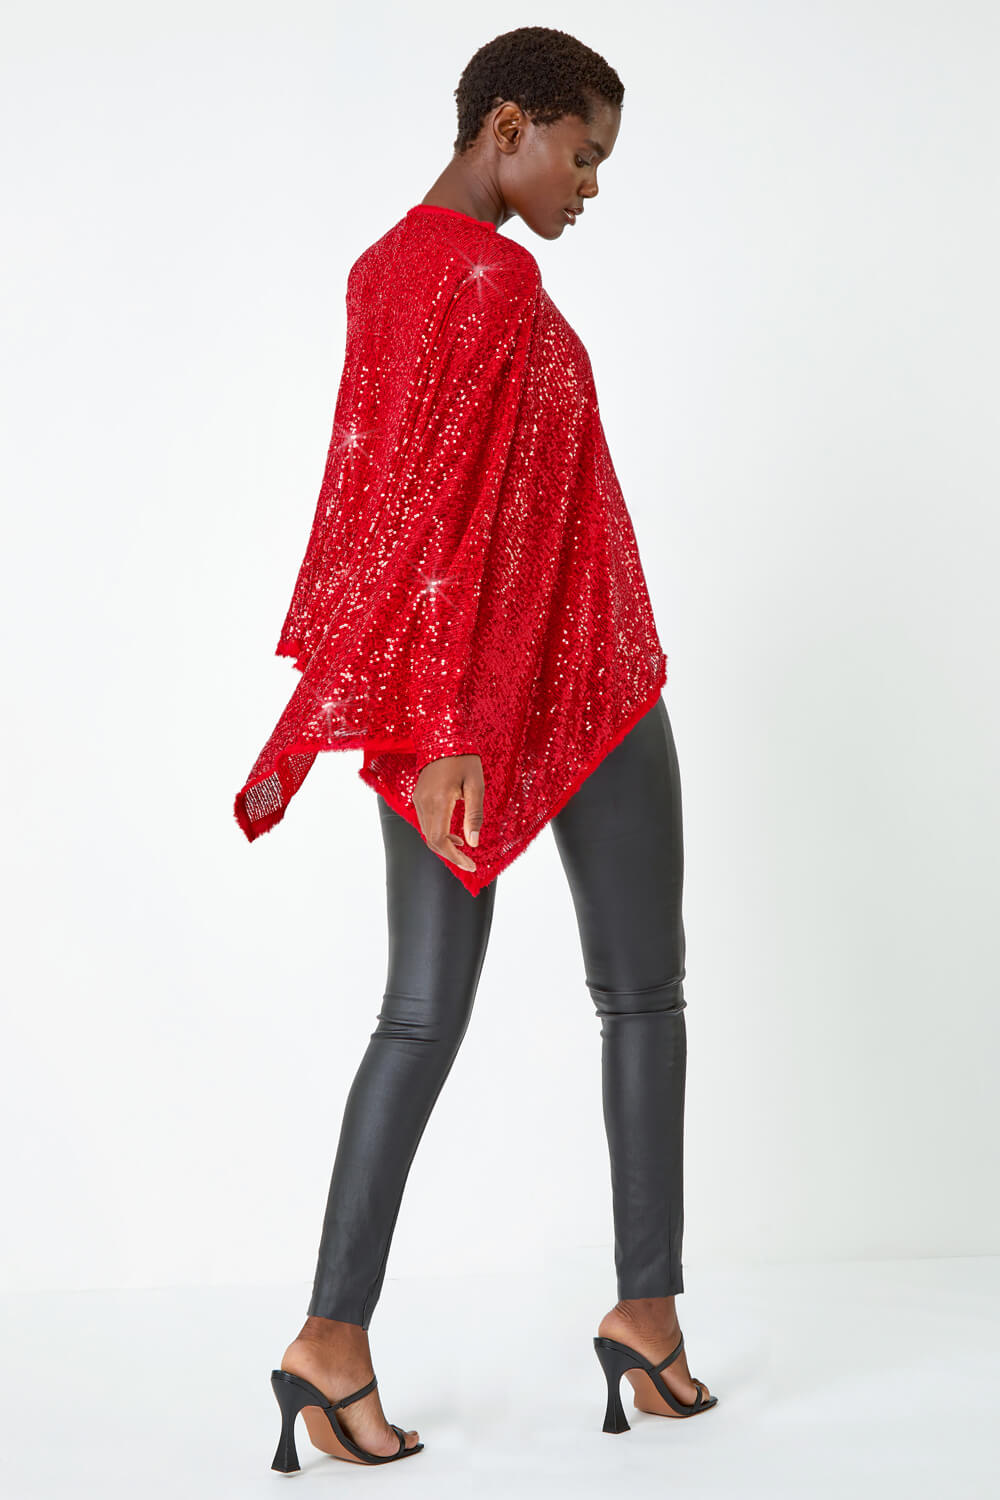 Red Sequin Cape Overlay Stretch Top, Image 3 of 7